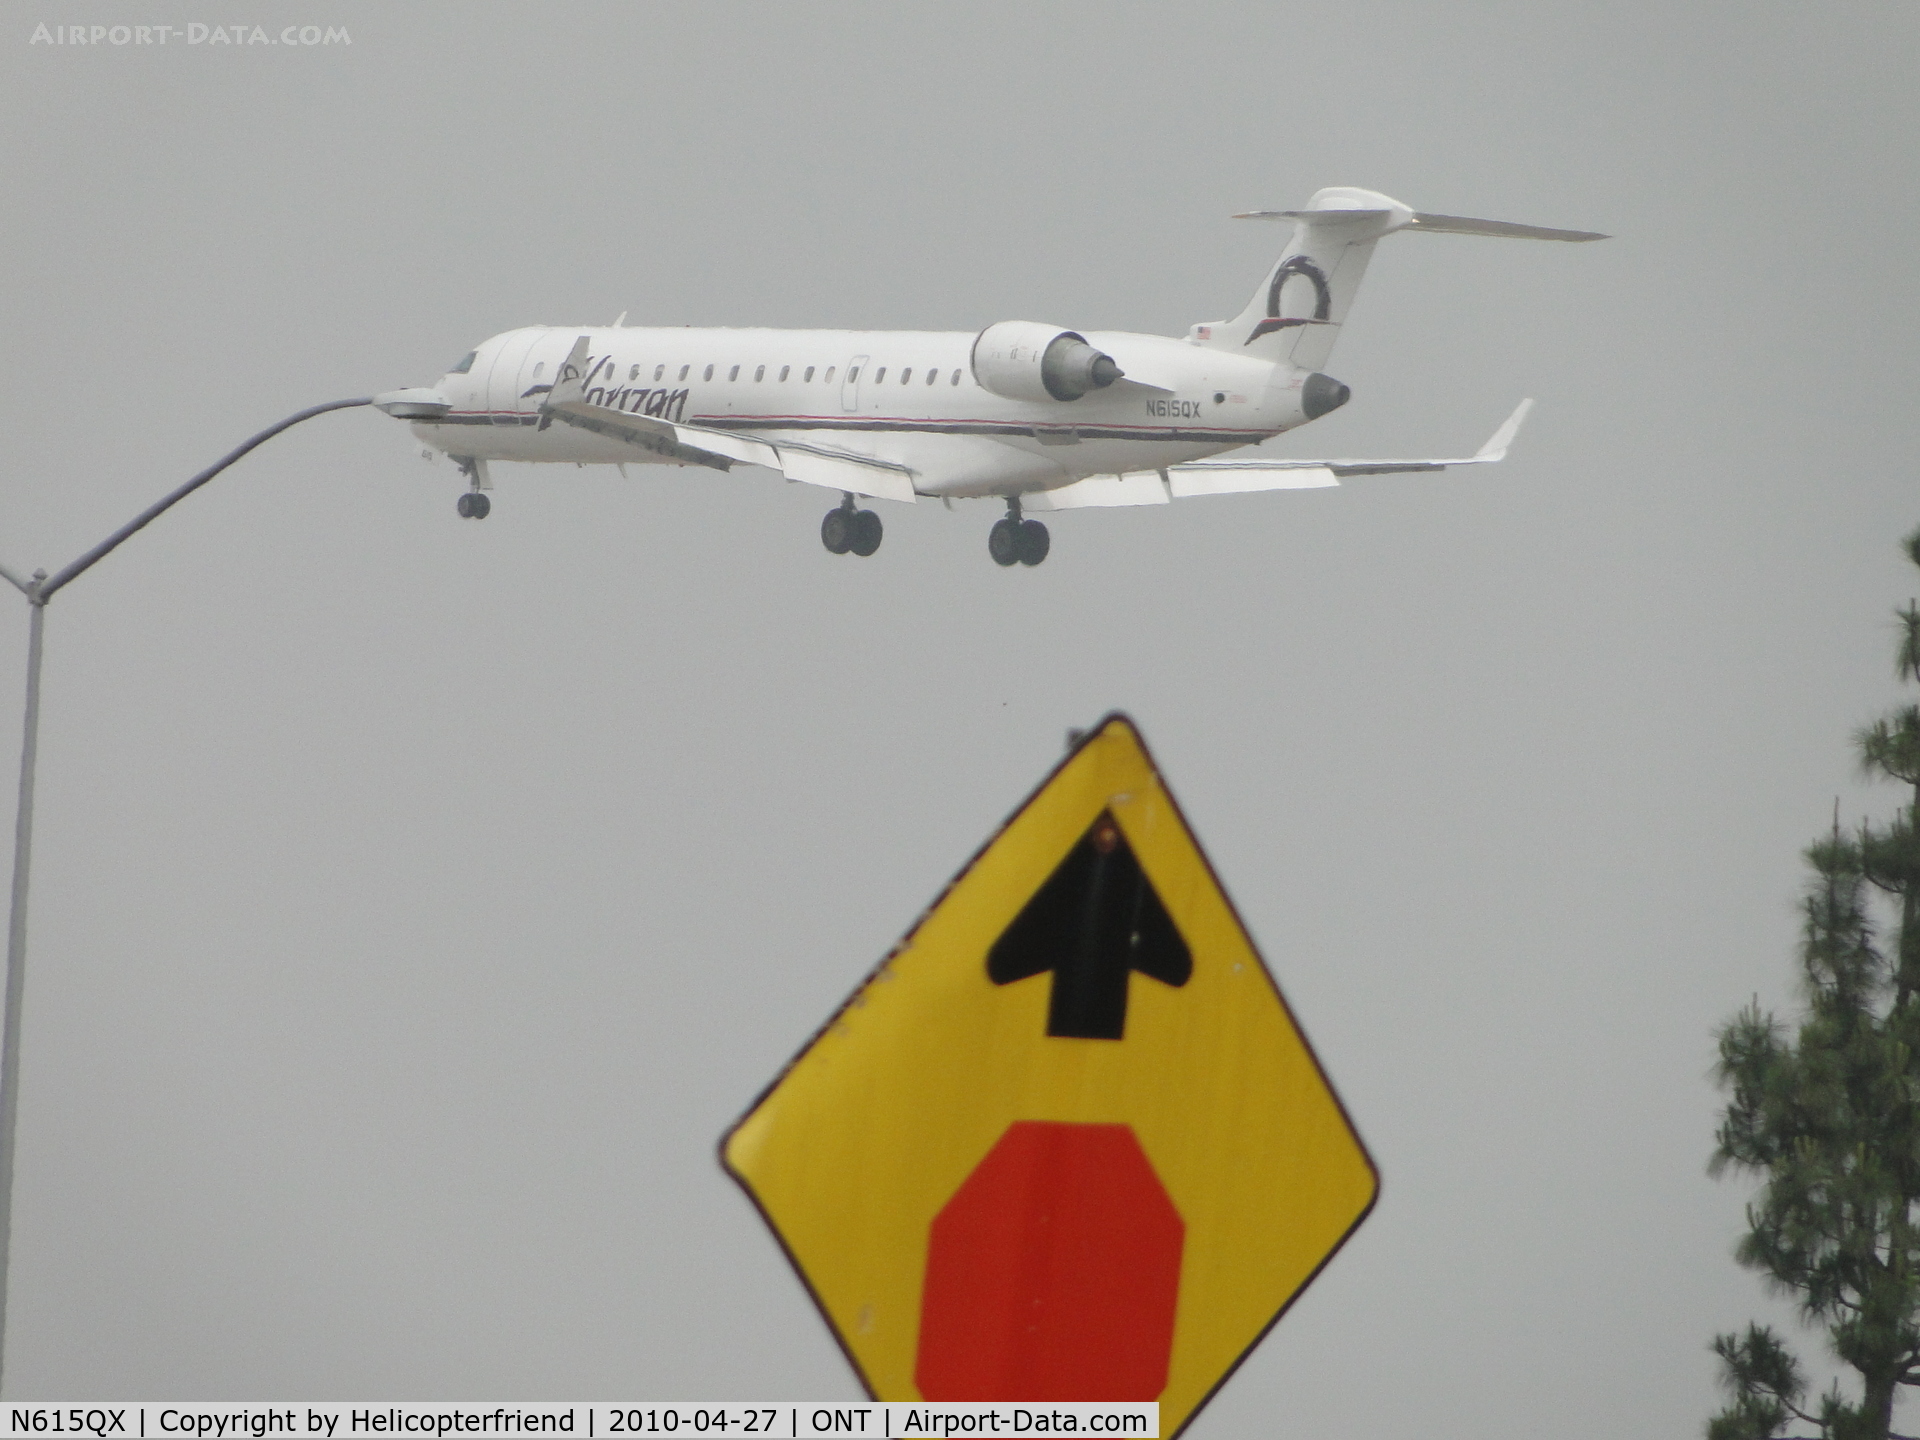 N615QX, 2002 Bombardier CRJ-701 (CL-600-2C10) Regional Jet C/N 10065, In the fog, refused to stop and looks like it almost hit the light